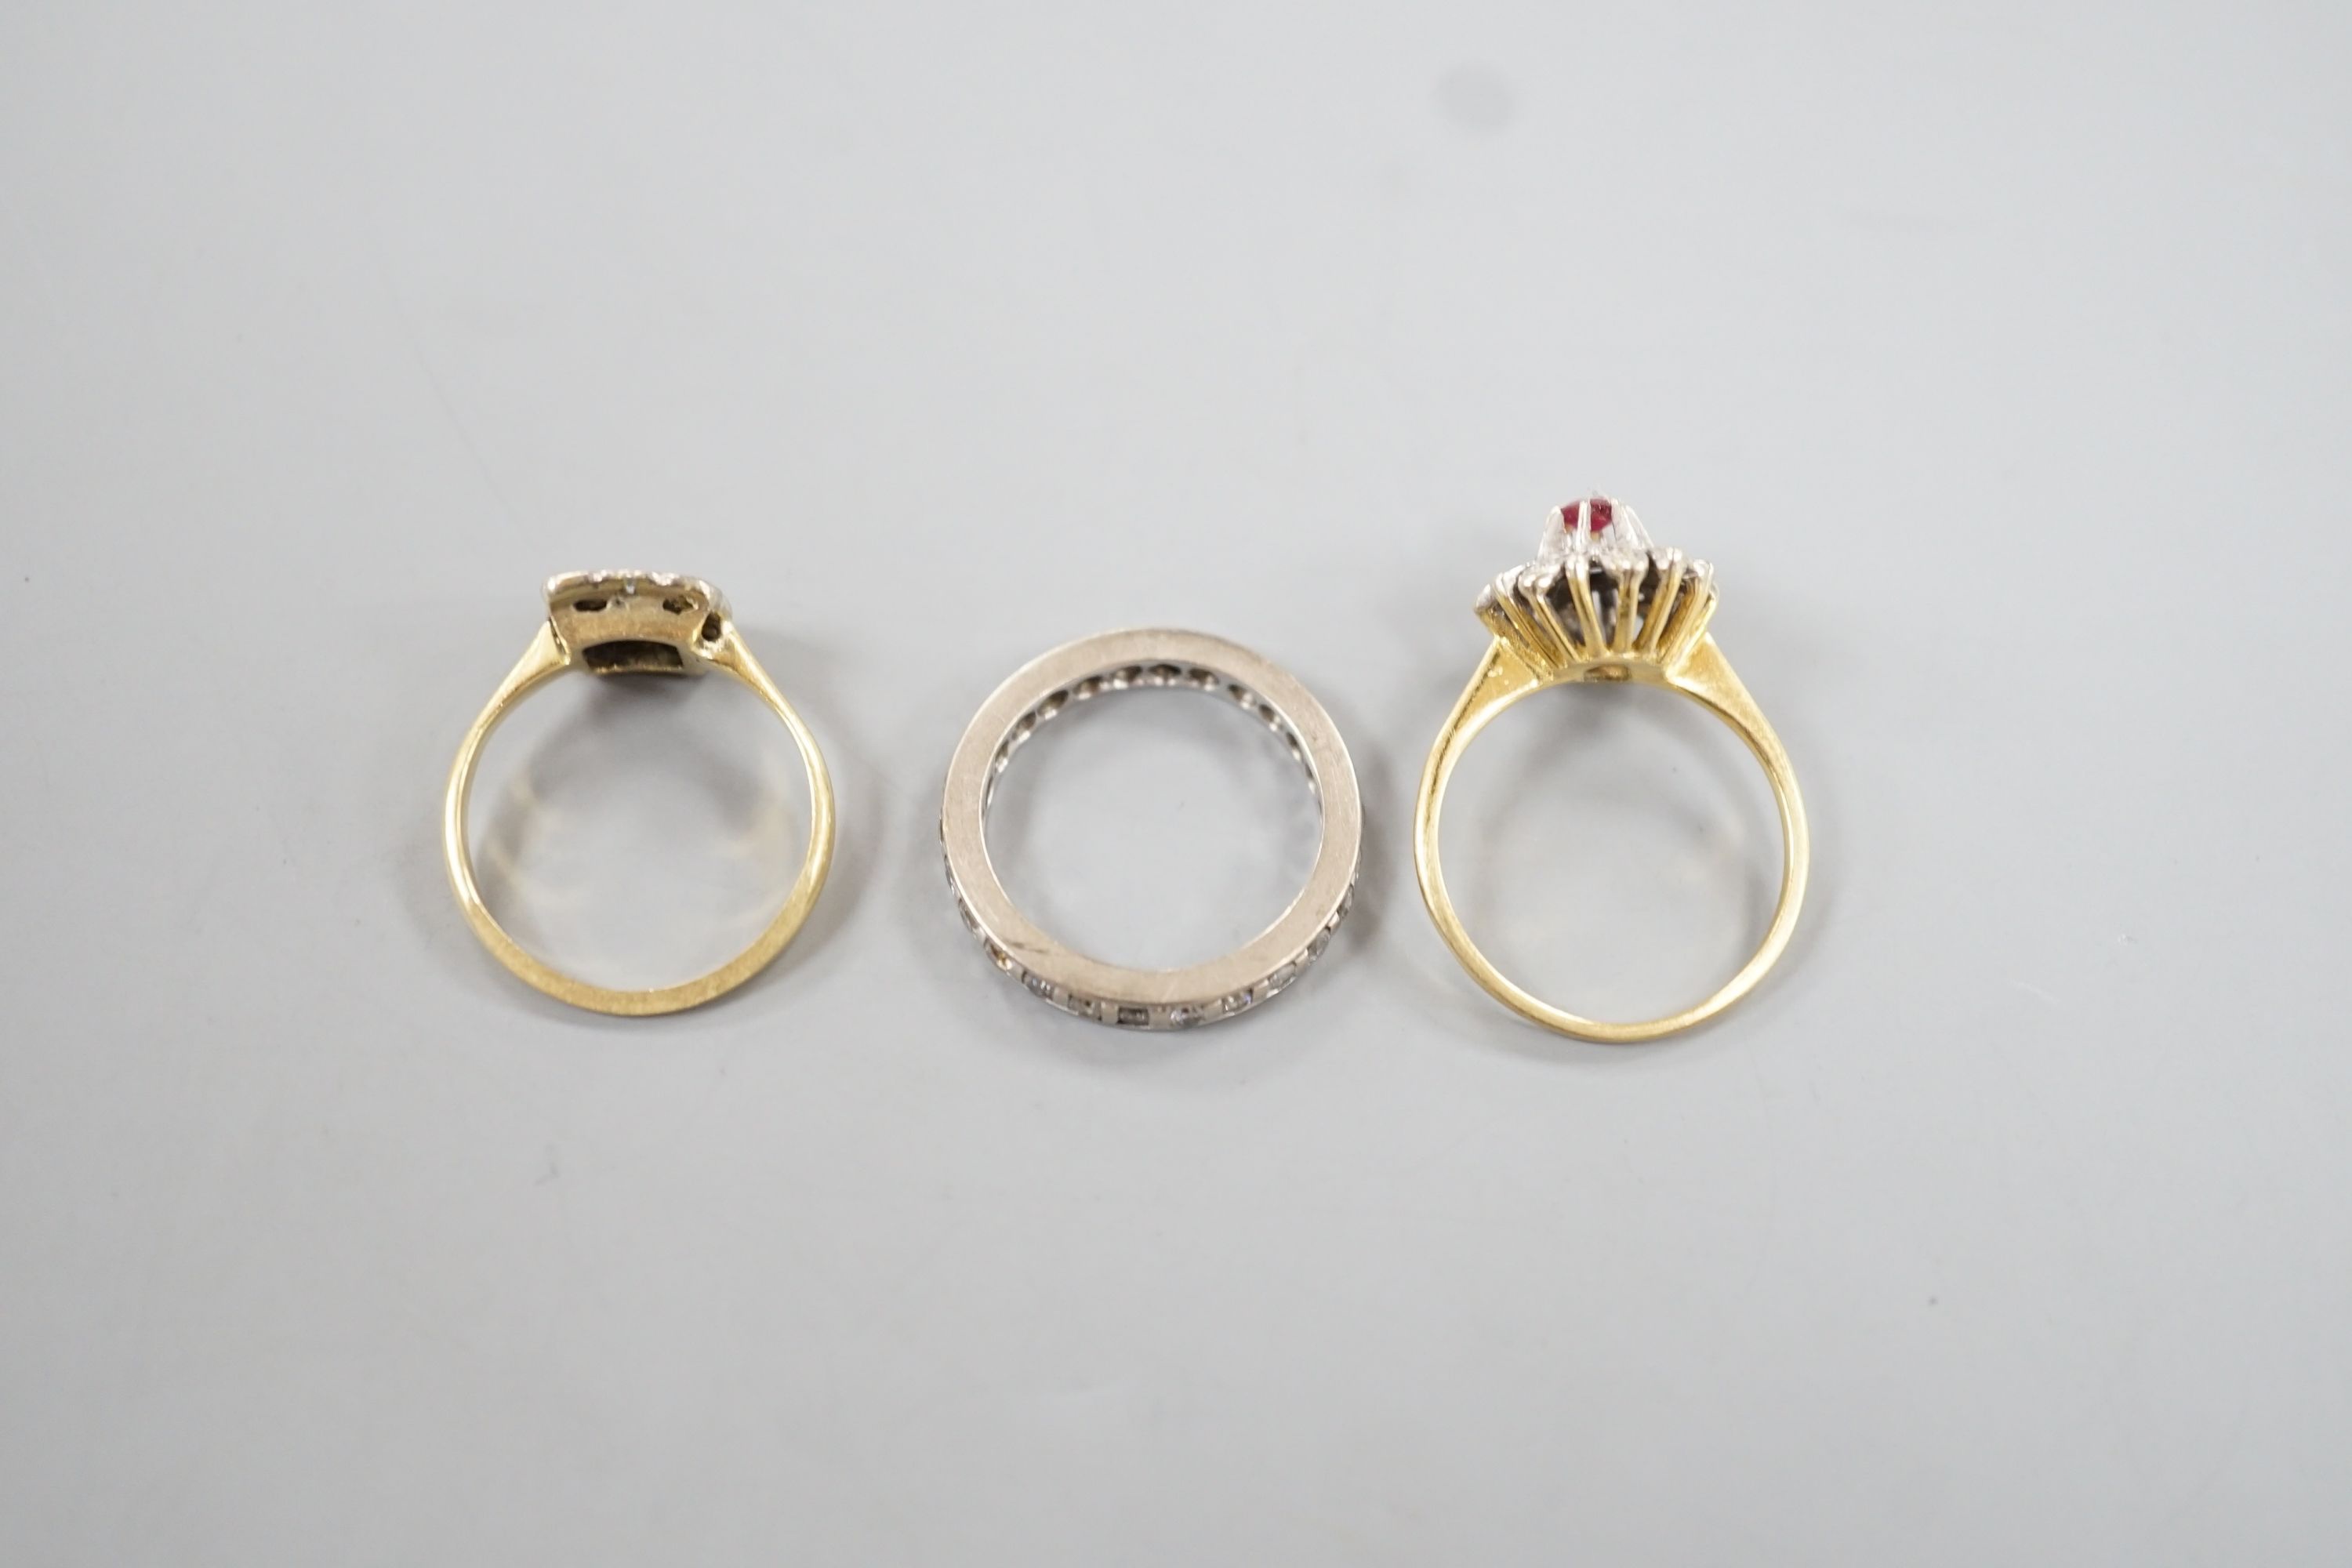 A white metal an diamond chip set full eternity ring, size J/K, gross 3.4 grams, a 1920's 18ct and nine stone diamond set tablet ring, size K/L, gross 2.4 grams and a yellow metal and gem set cluster ring, gross 3 grams.